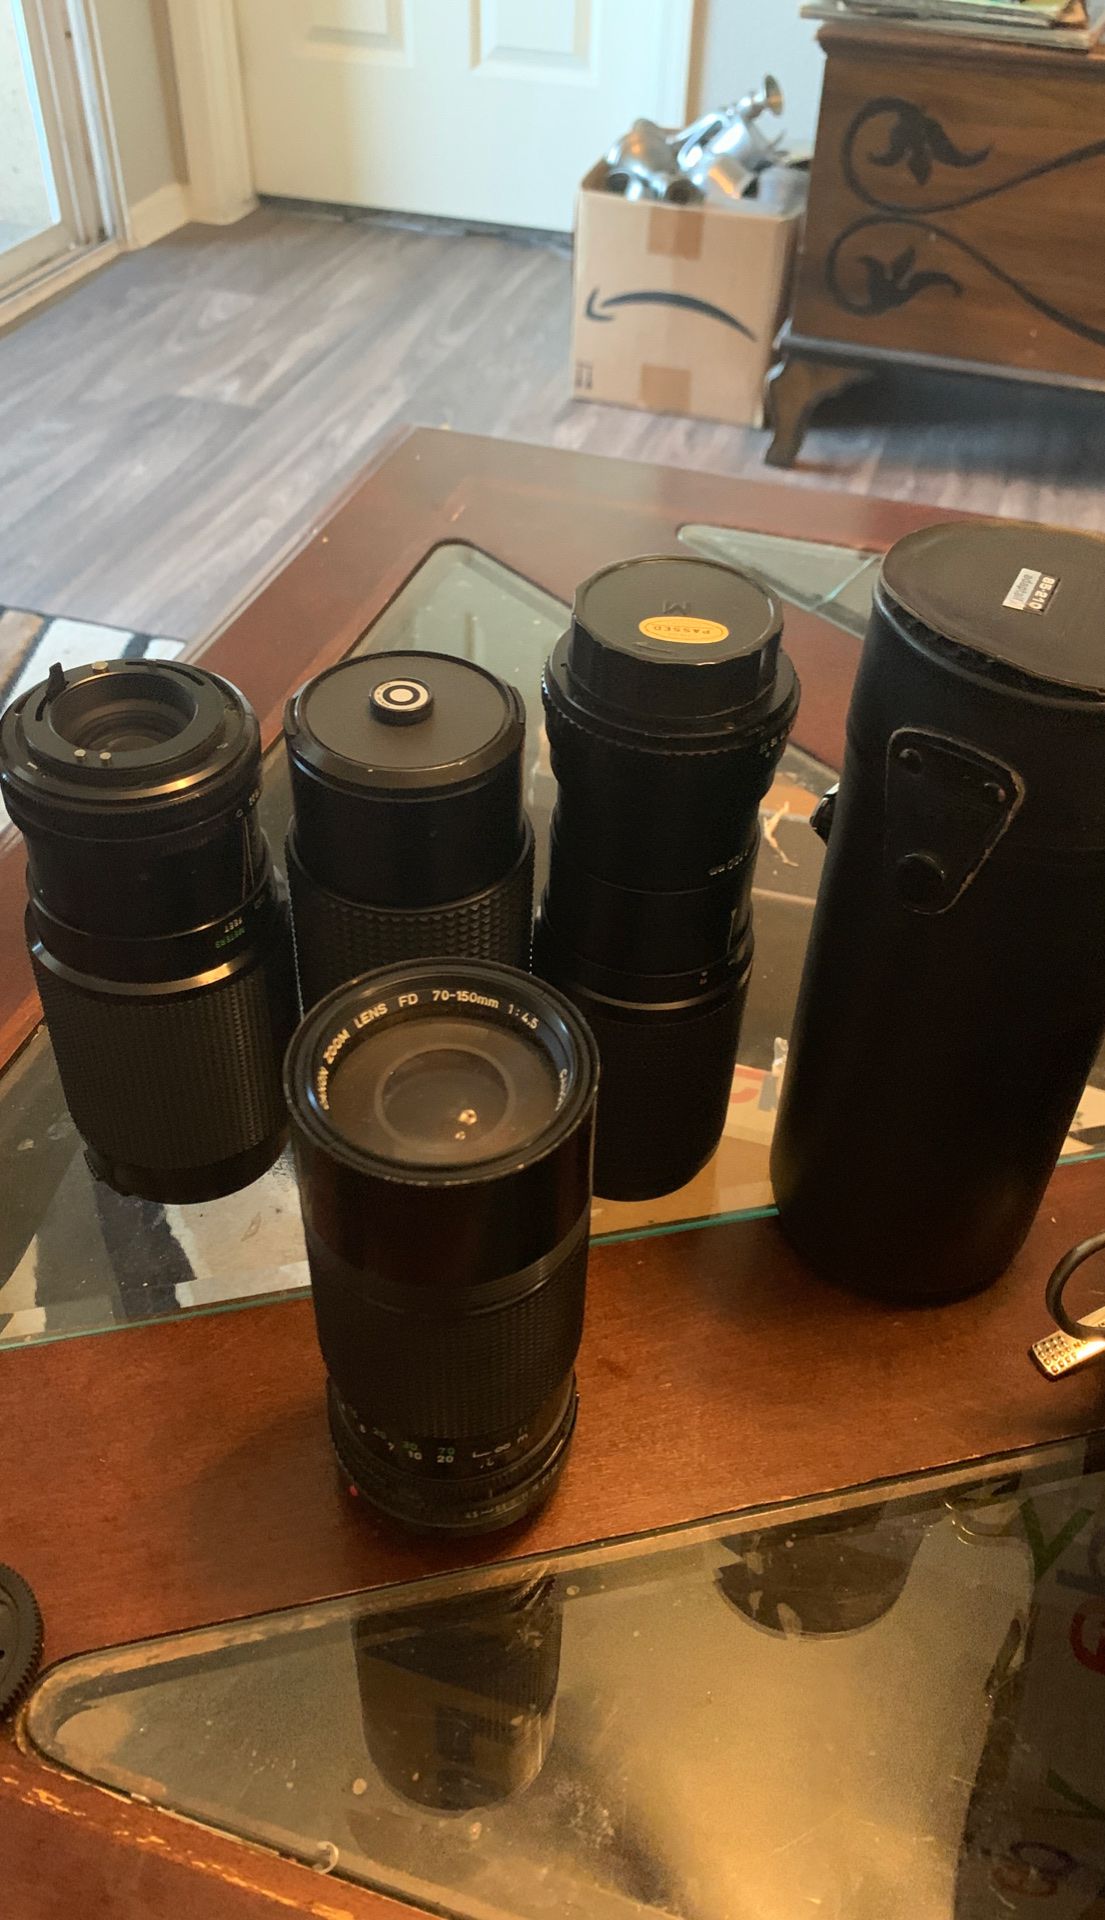 5 camera lenses, 2 bags, an old Petri camera, a flash, and other various attachments.